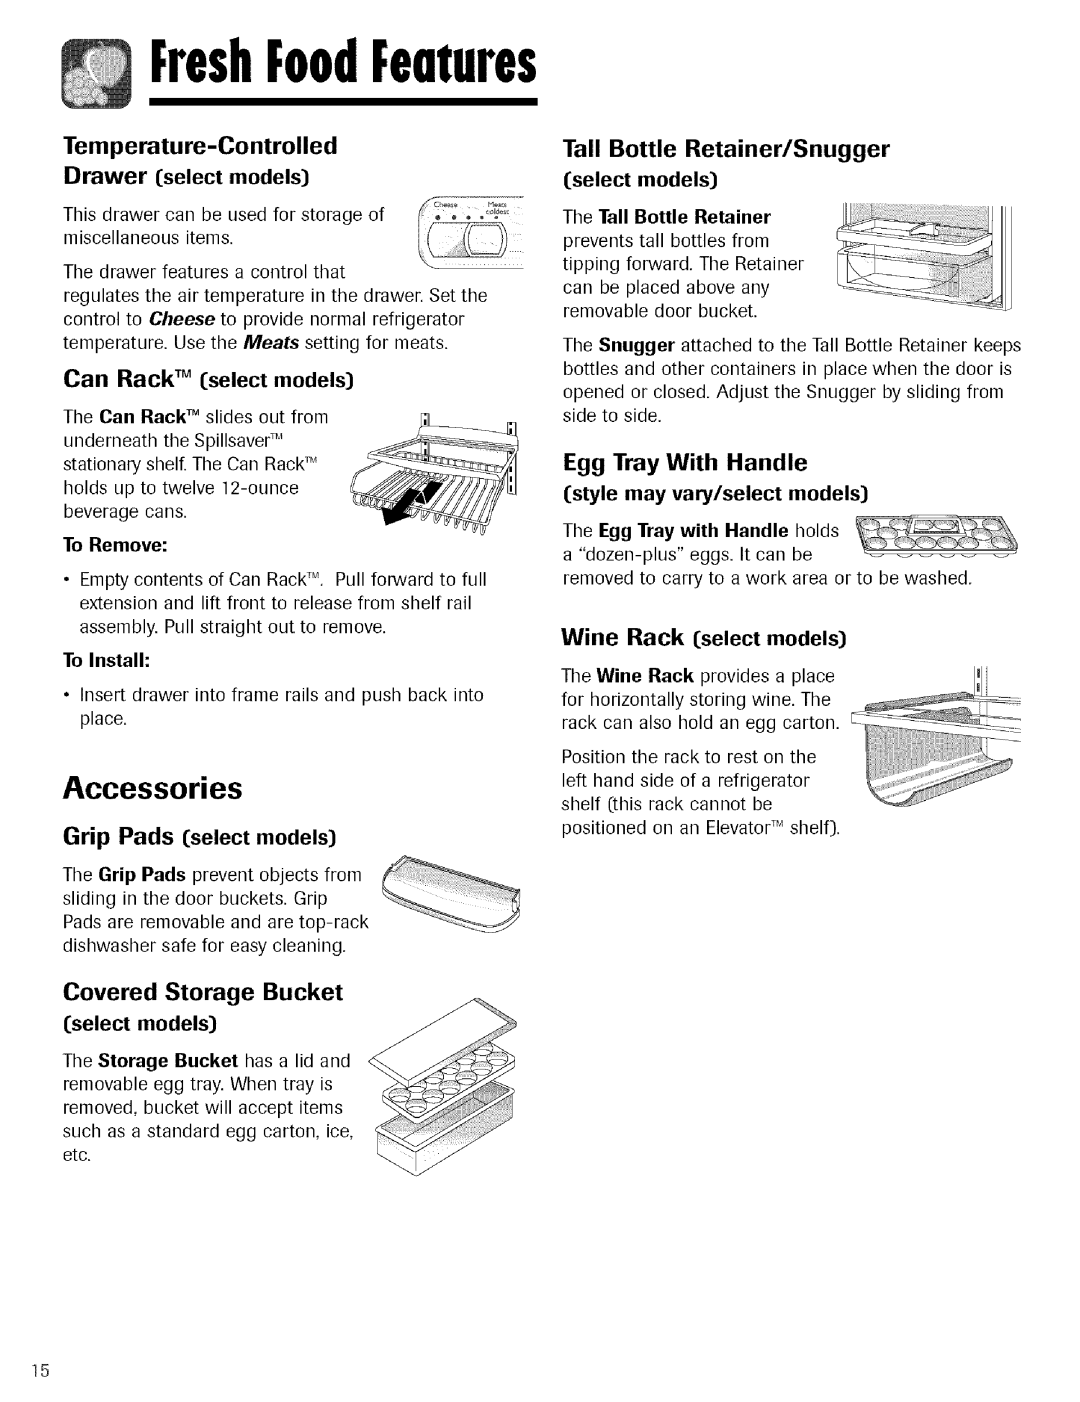 Maytag Refrigerator warranty Accessories, Grip Pads select models, Temperature-Controlled Drawer select models, Wine Rack 